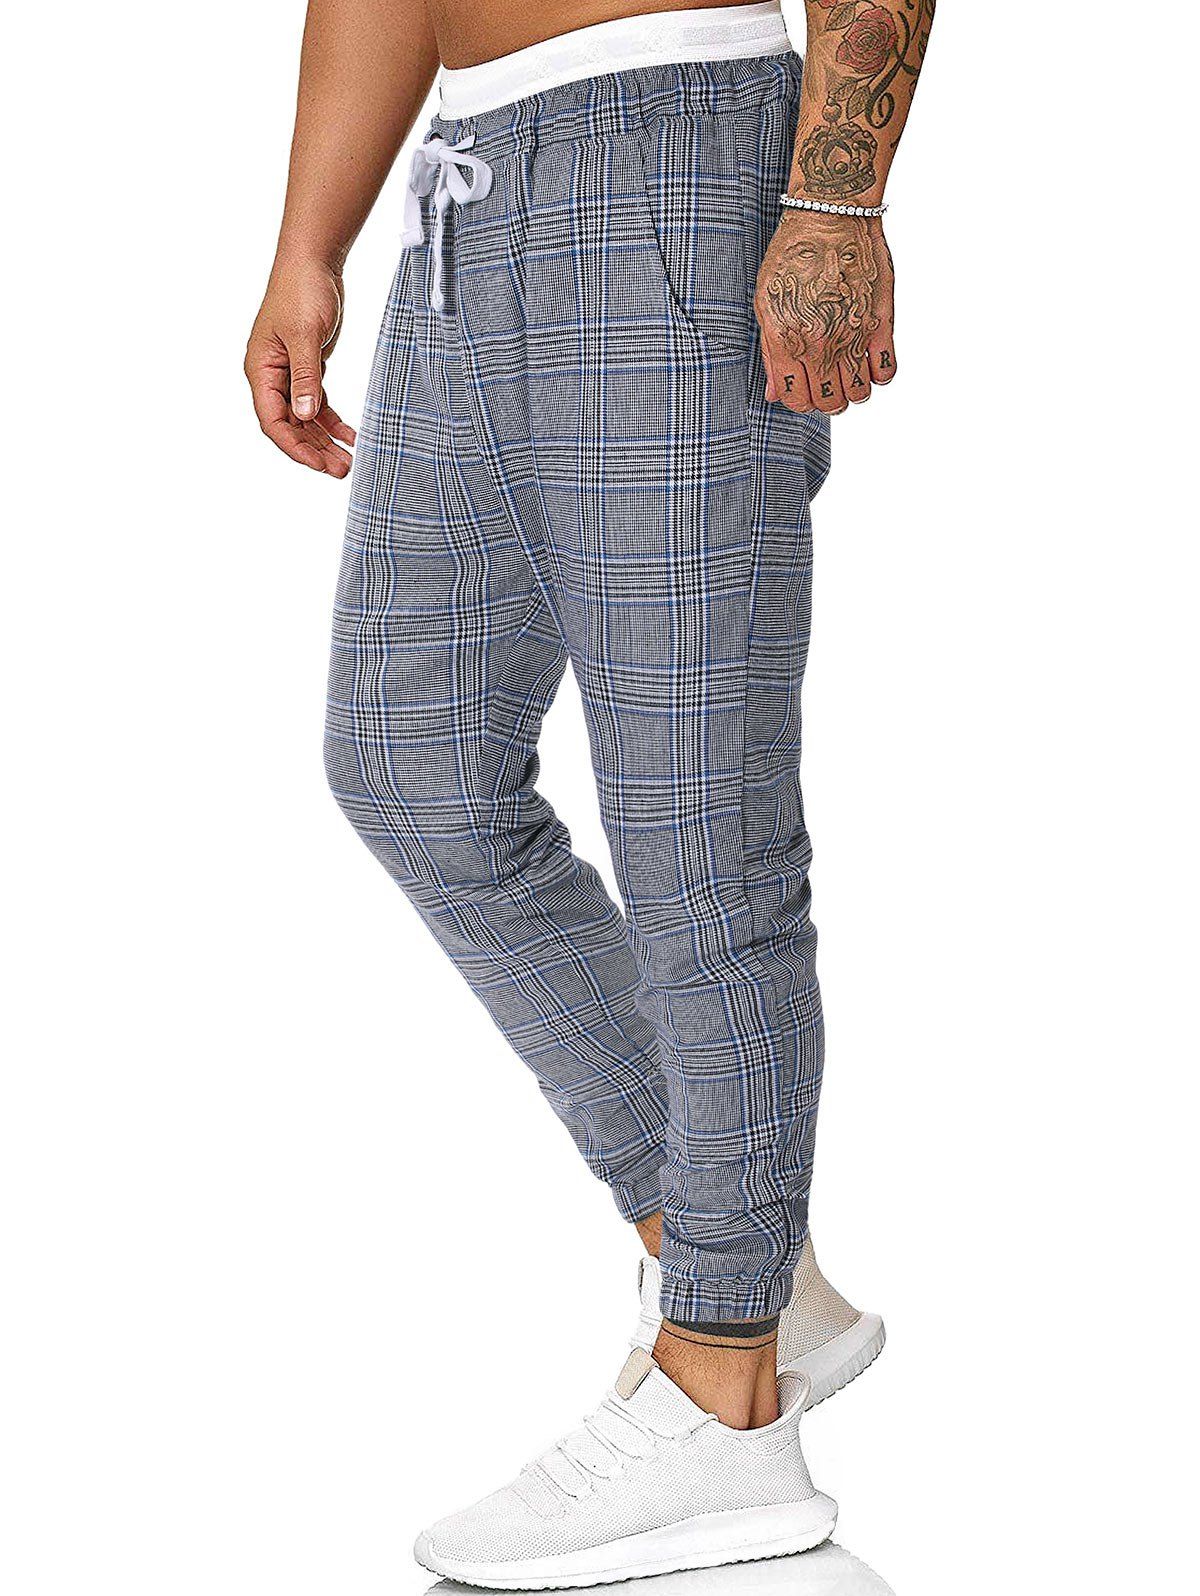 [41% OFF] 2020 Houndstooth Plaid Print Casual Jogger Pants In BLUE GRAY ...